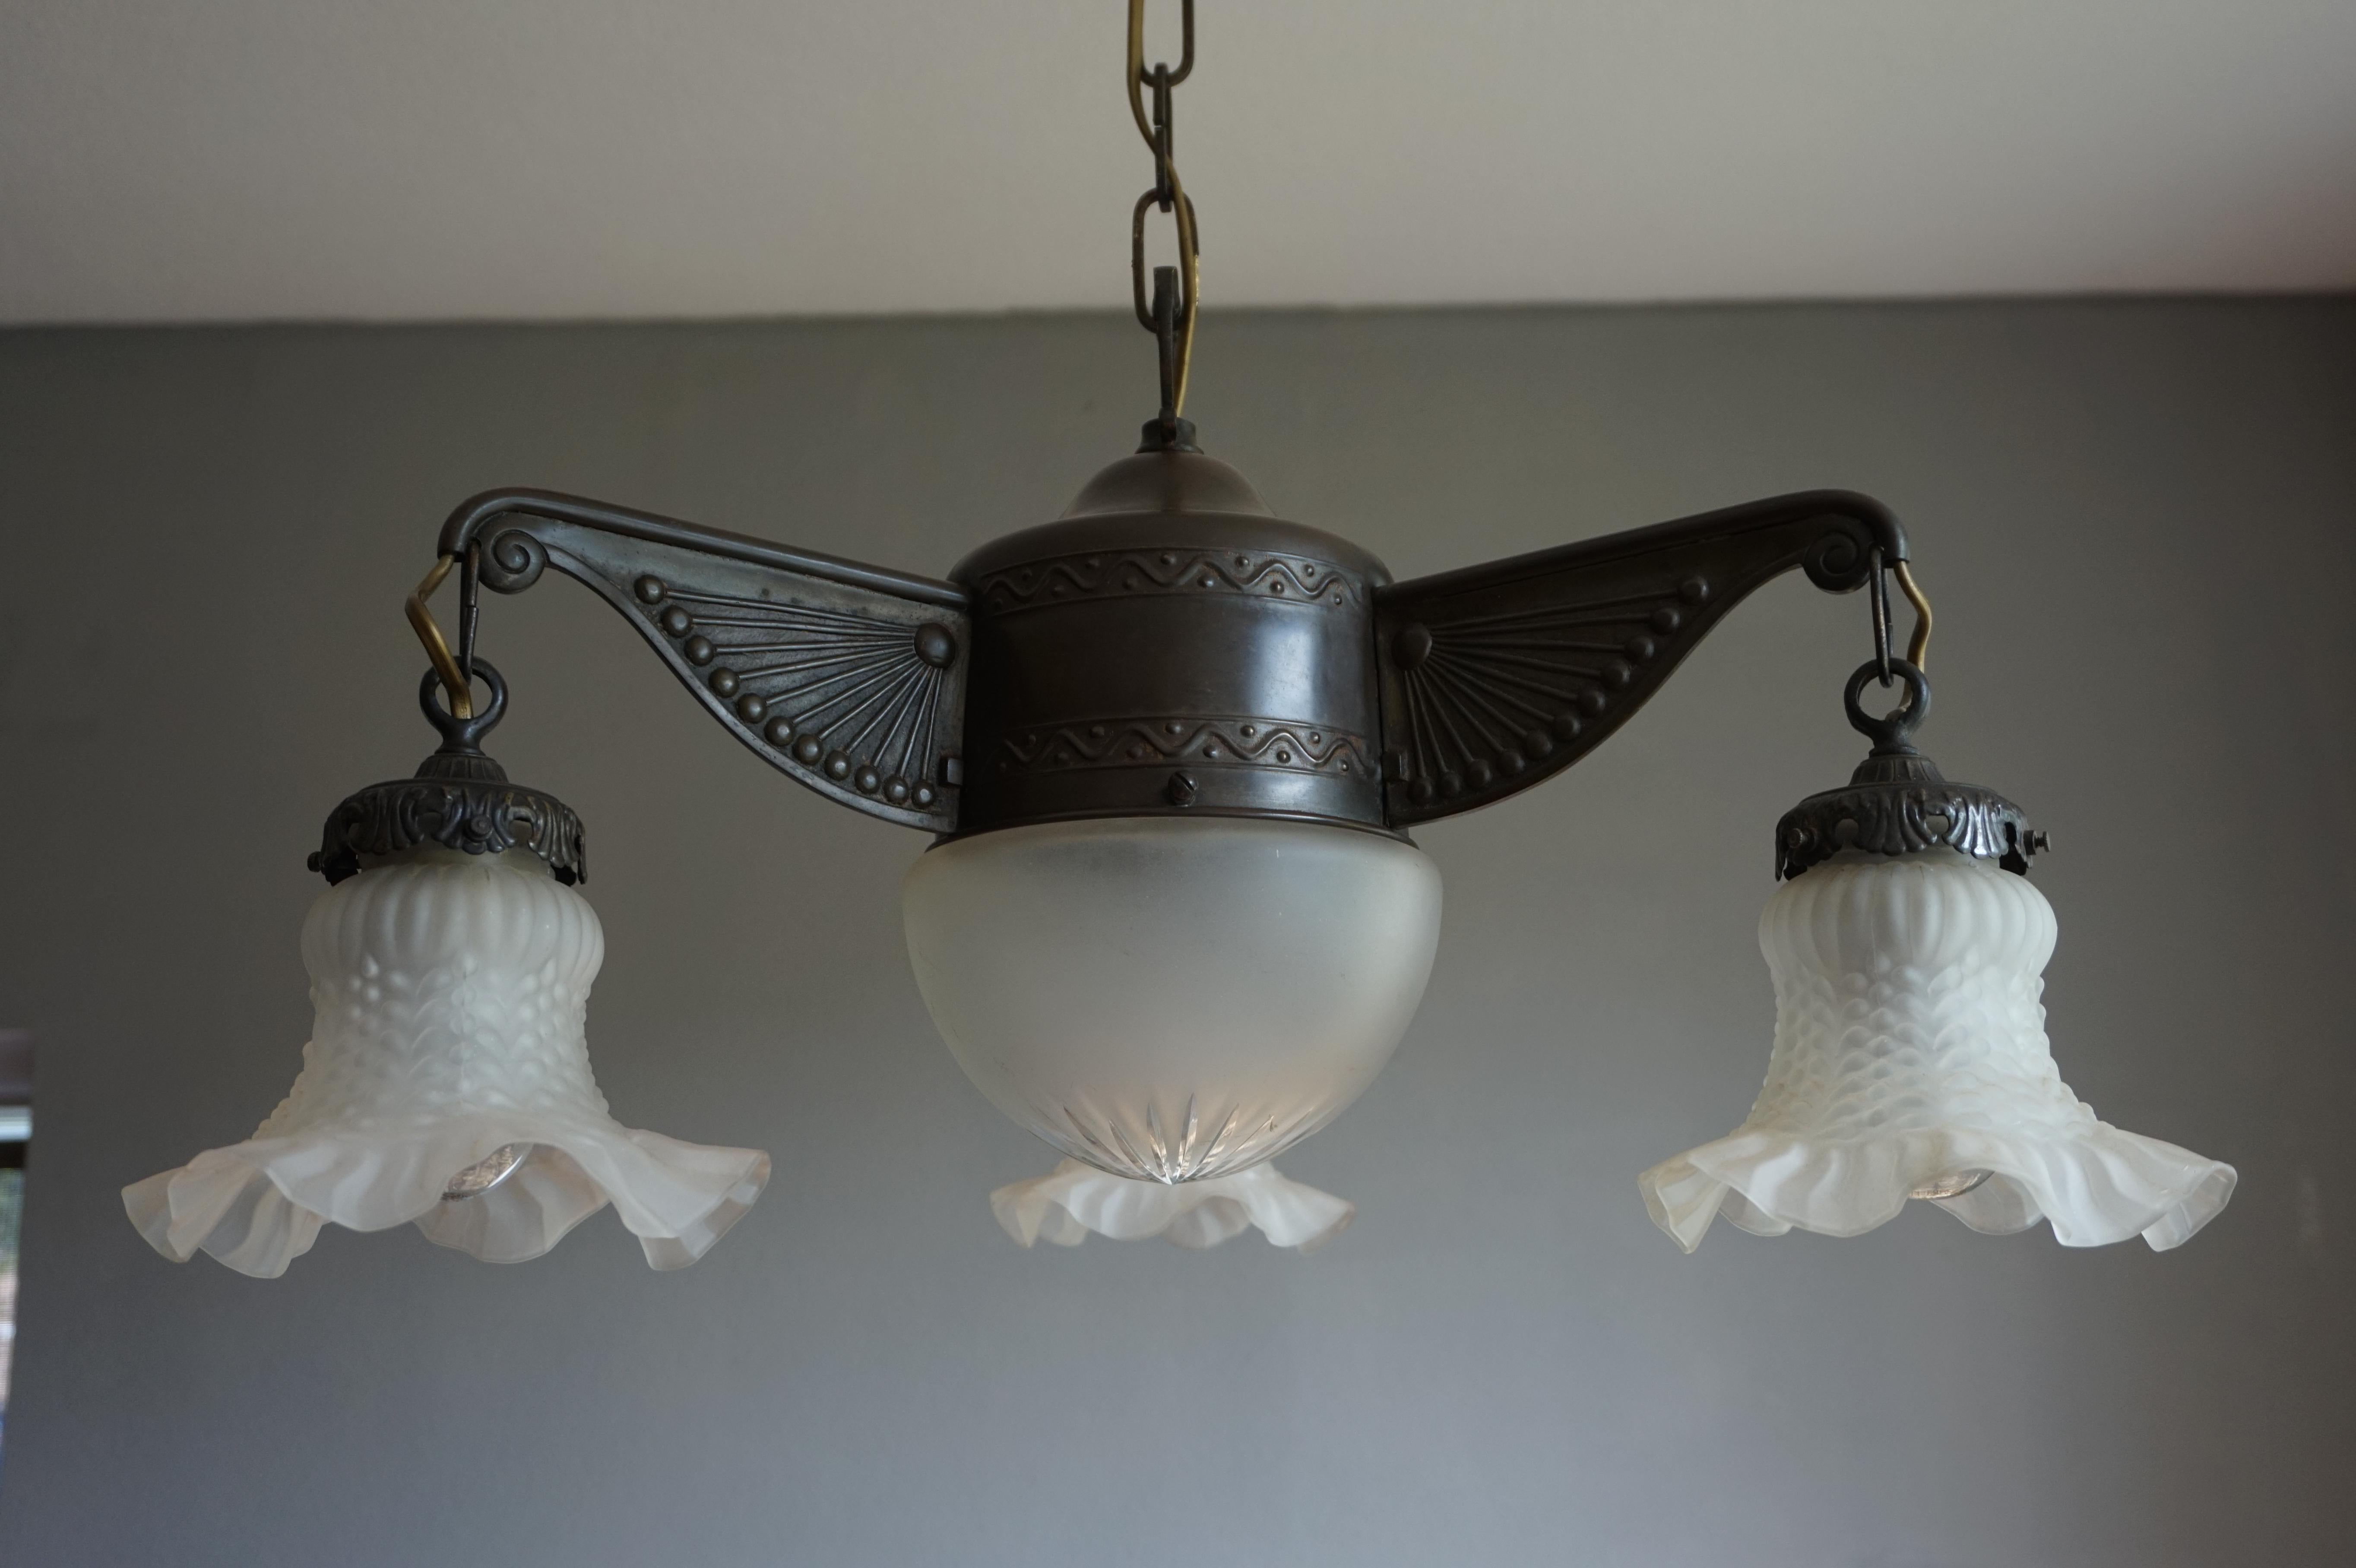 Great looking chandelier for a large entry hall or small dining area.

This small size and beautiful light fixture from the early 1900s is another one of our recent great finds. The design is a real joy to look at and its unusual small size (for a